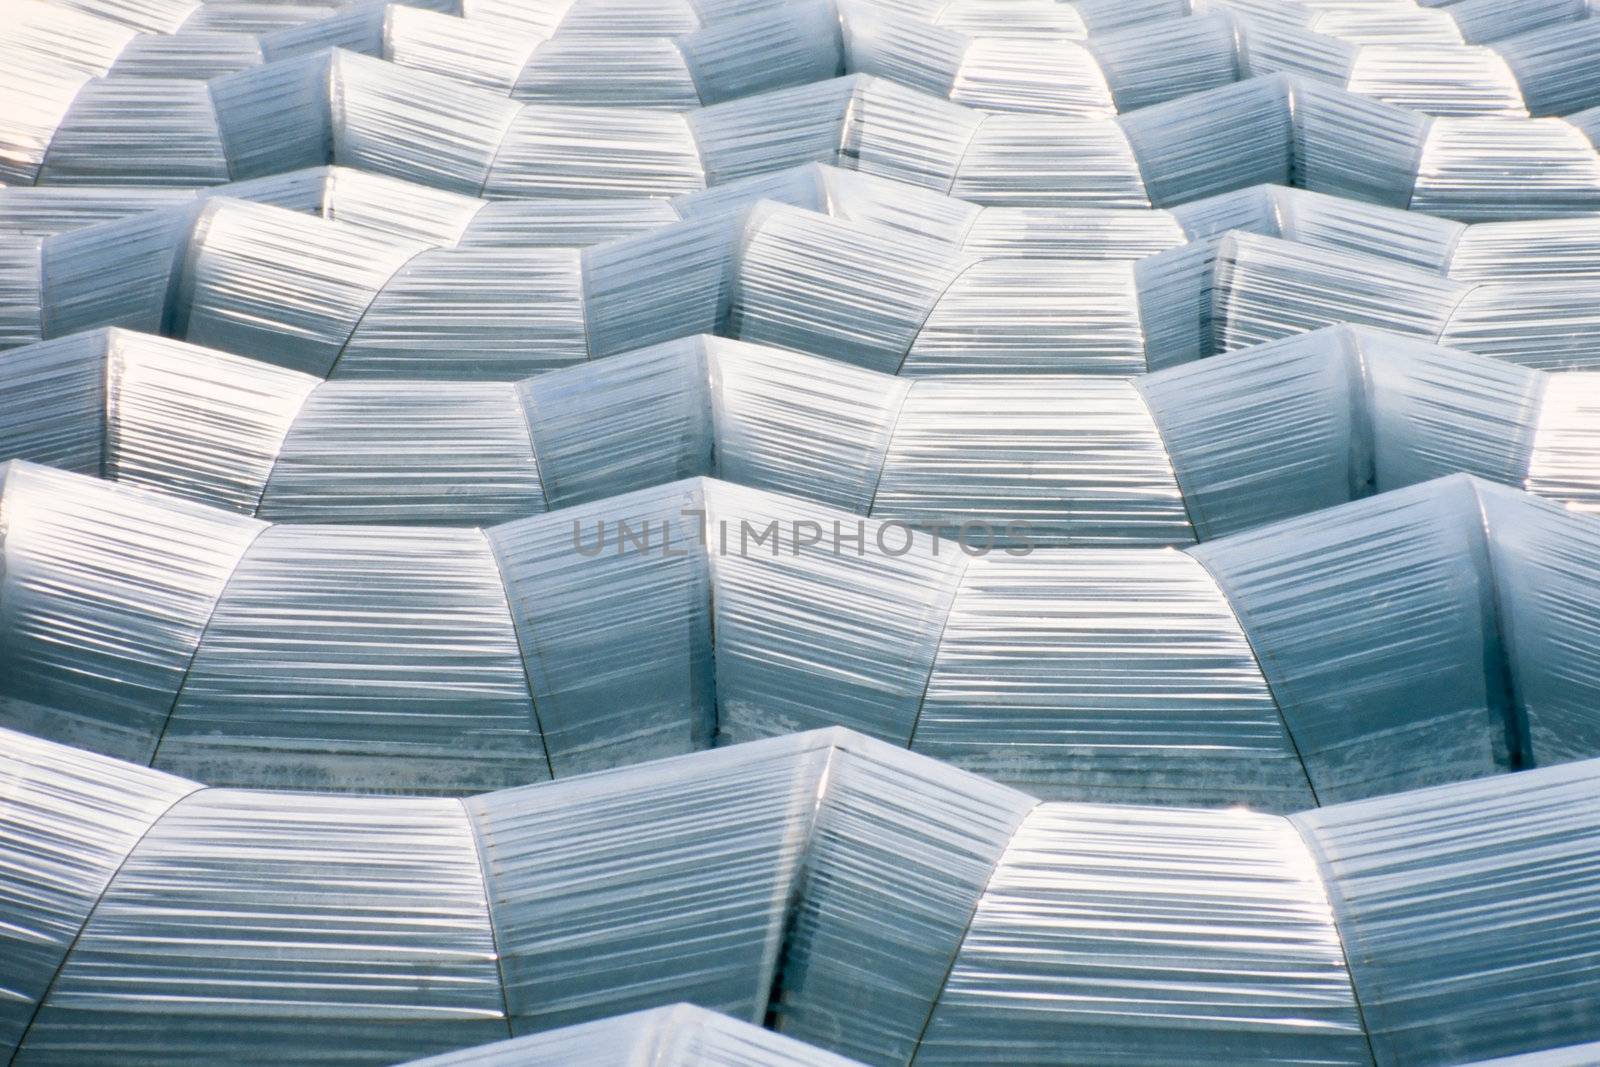 Pattern of endless sea of plastic horticulture greenhouse tunnels for intensive farming of vegetables.